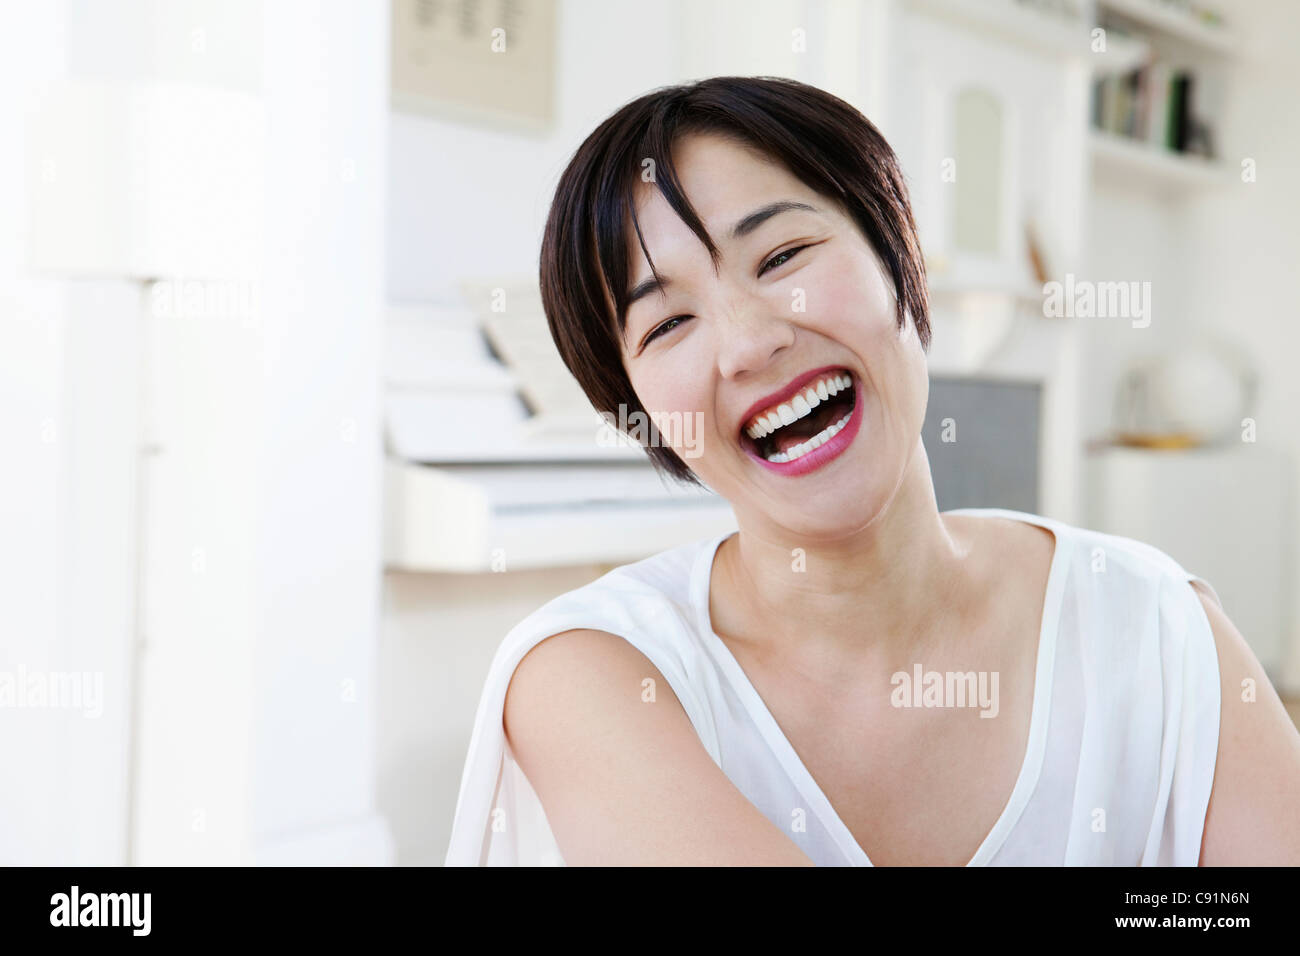 Close up of woman laughing Stock Photo